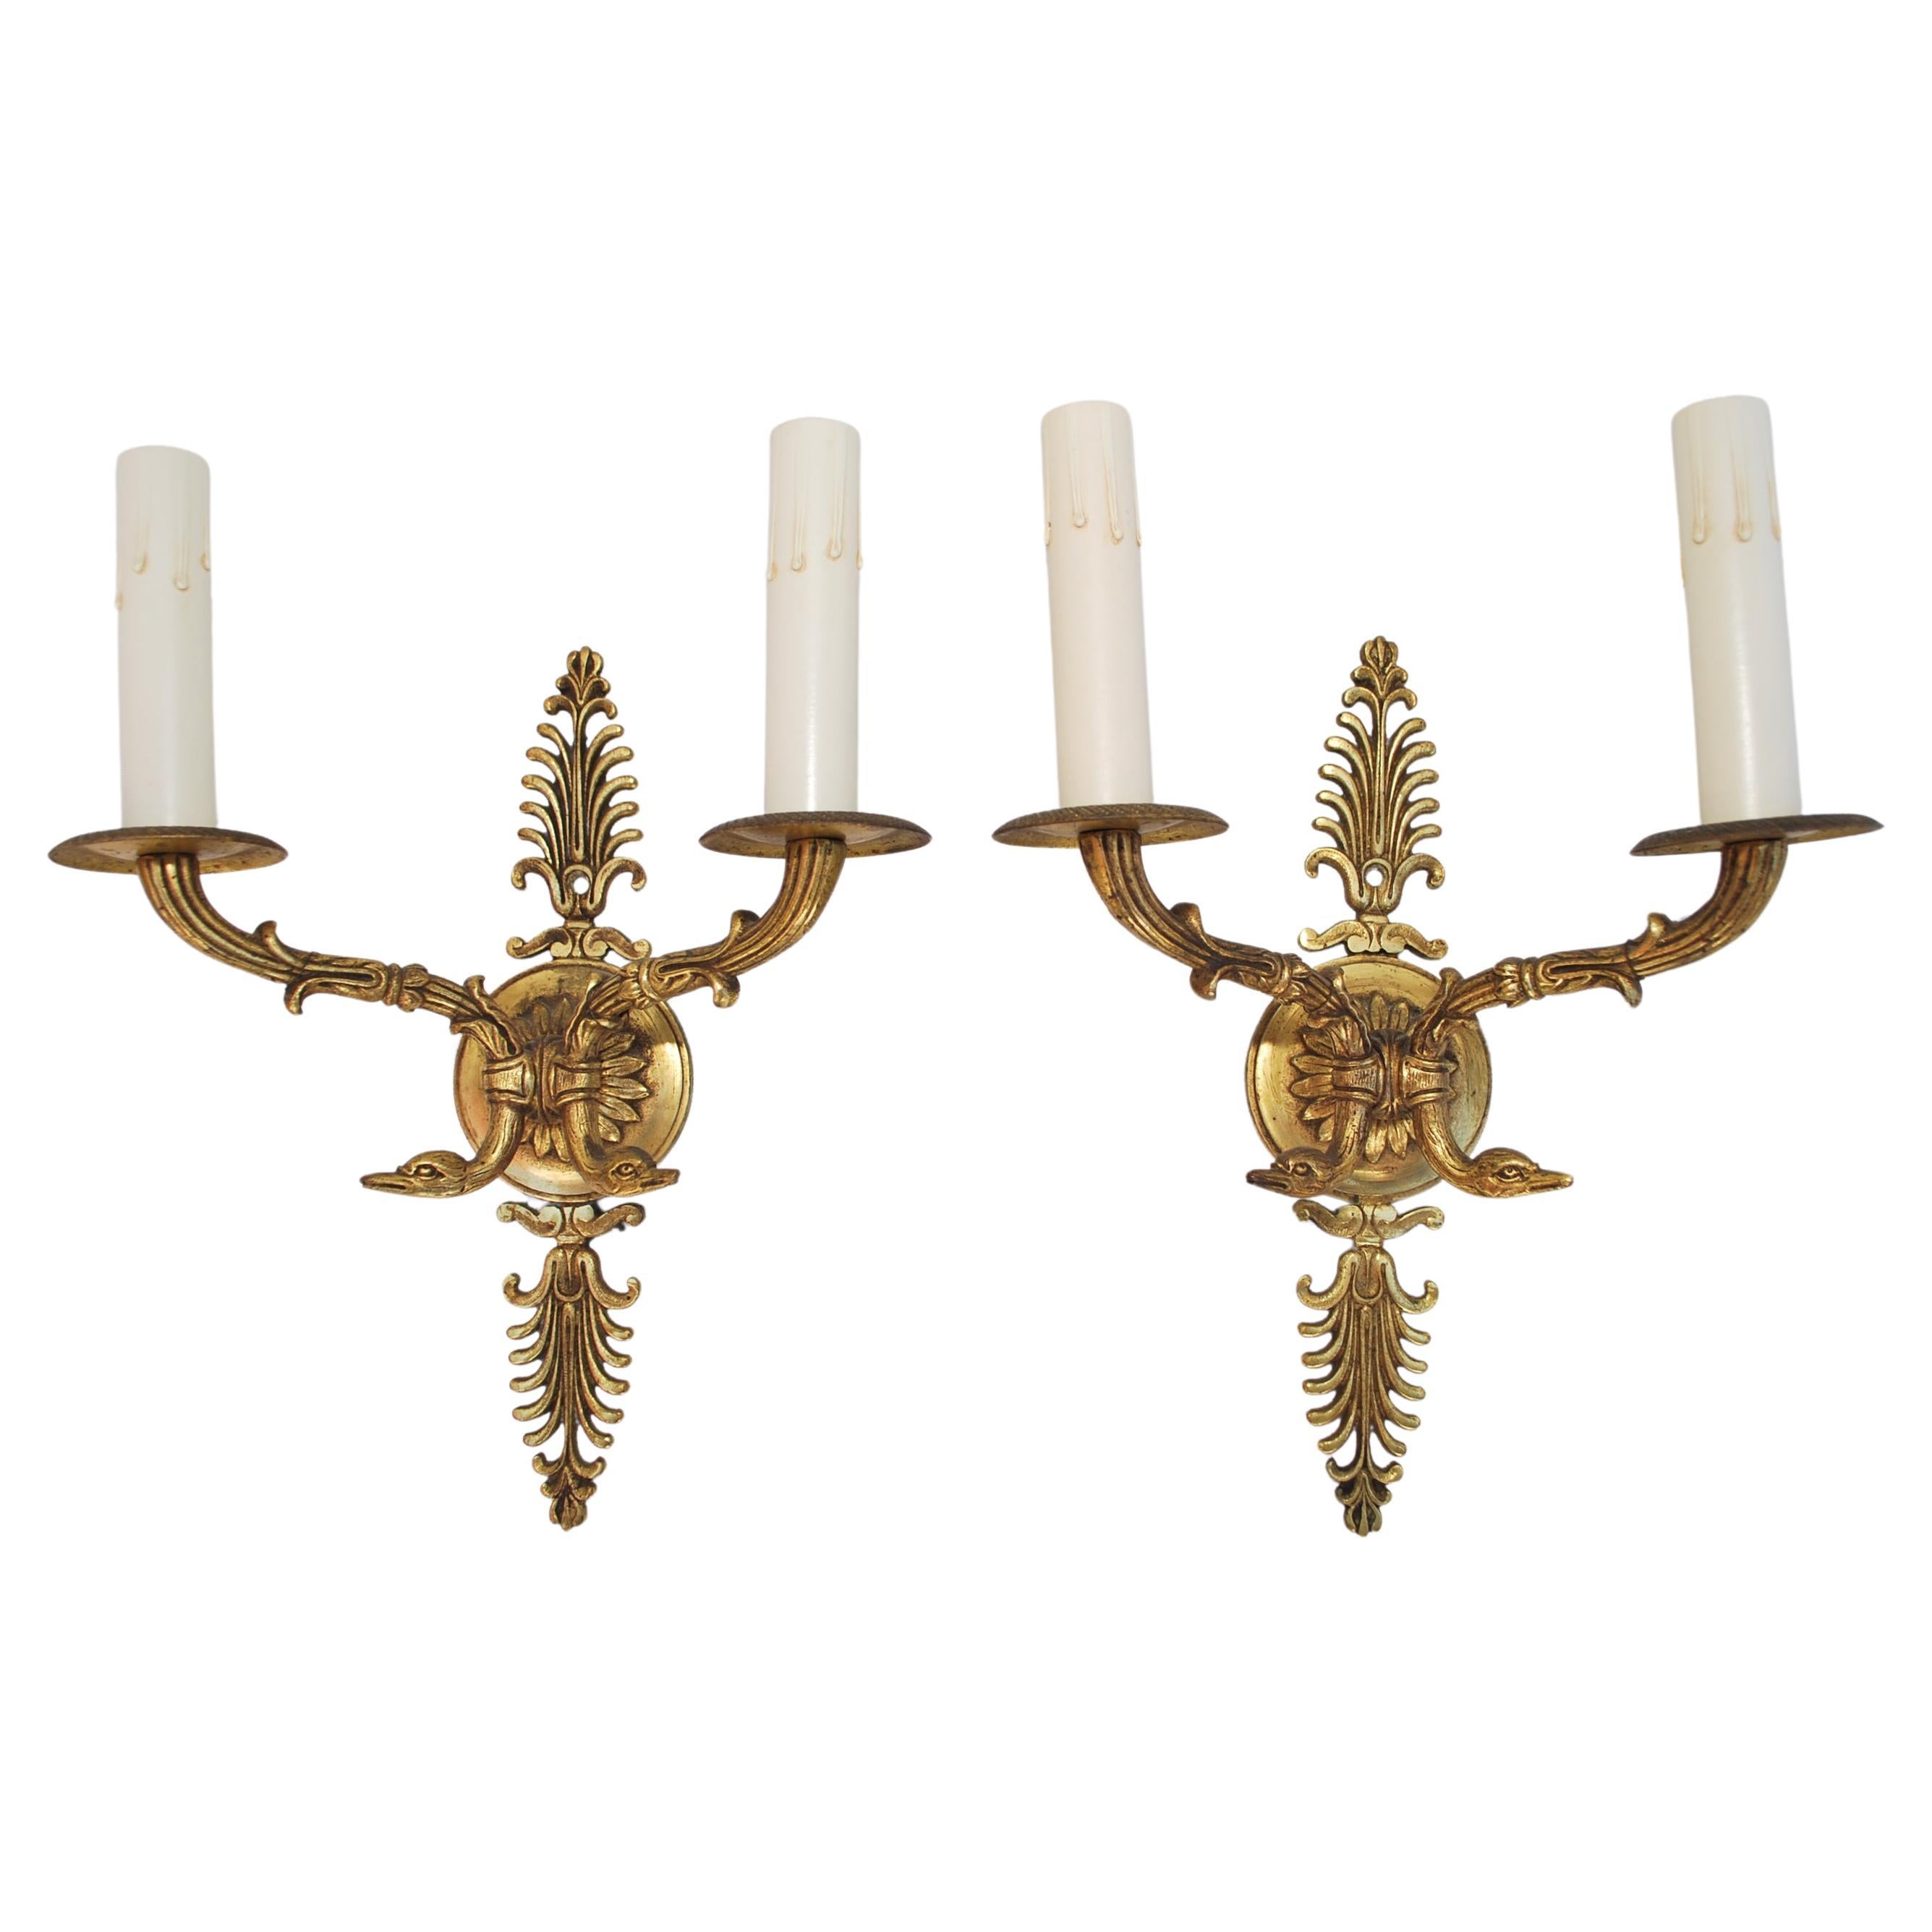 Elegant pair of French Empire style sconces For Sale